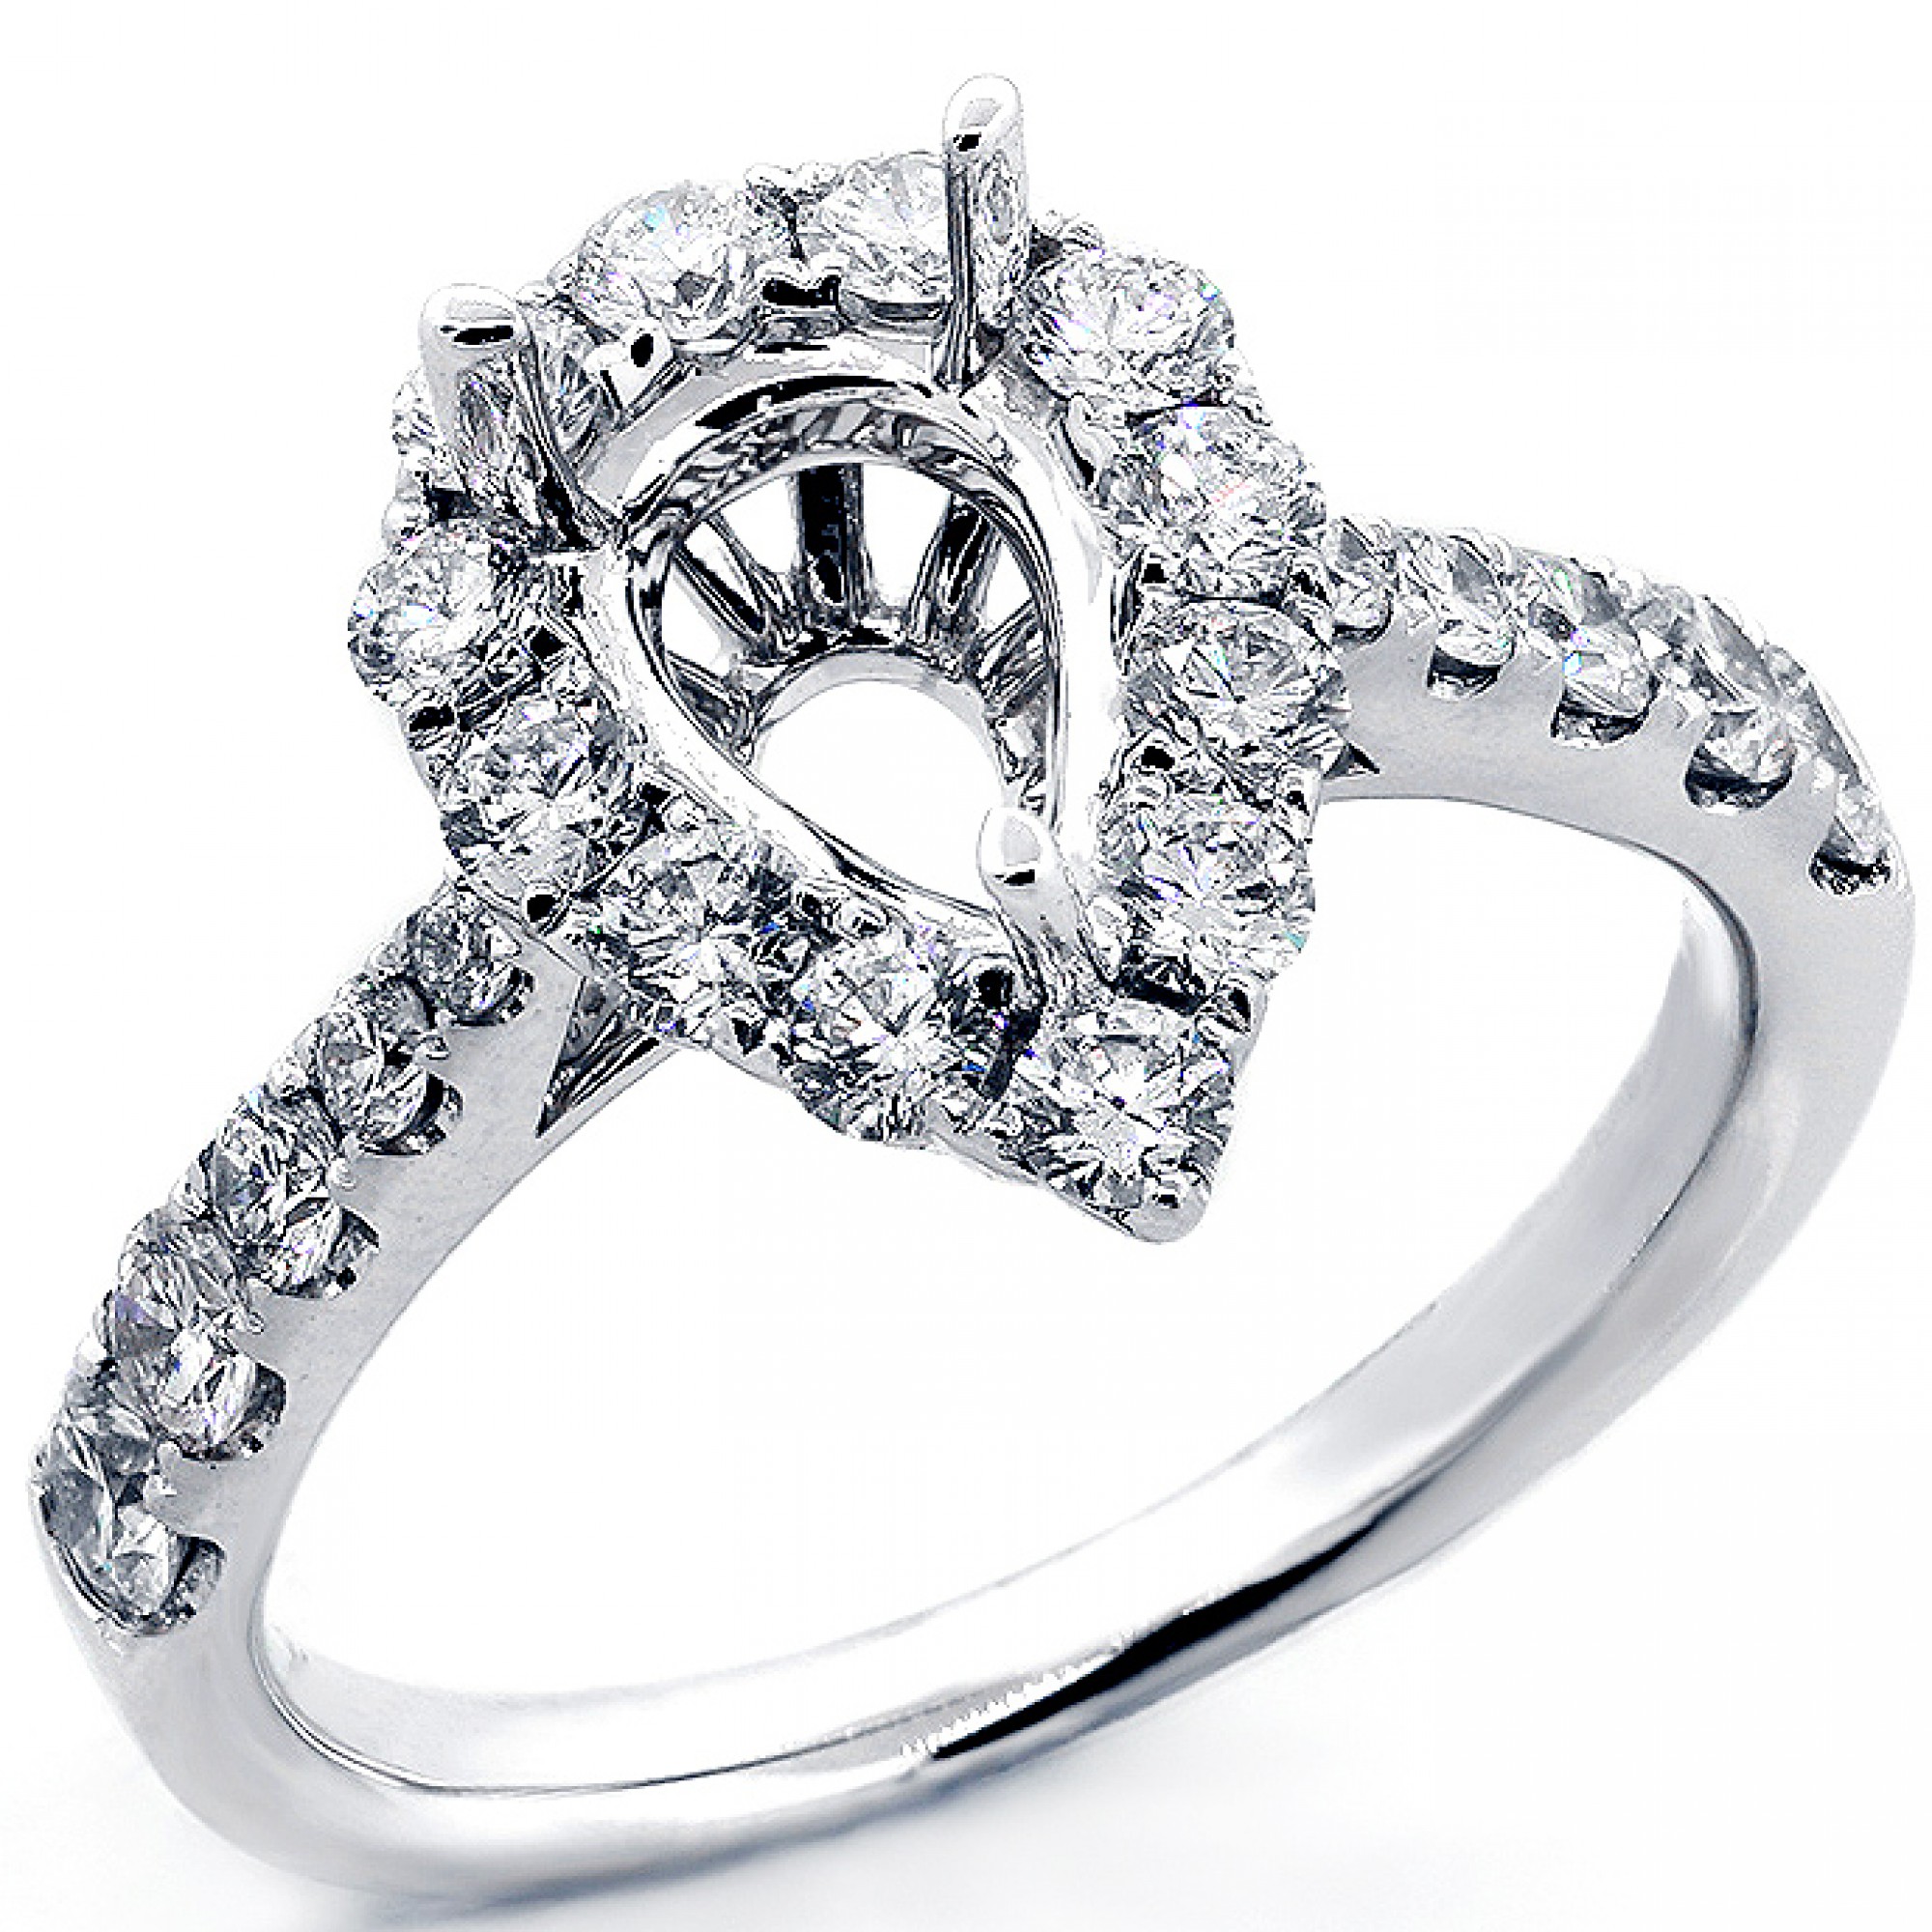 Salt and Pepper Diamond Engagement Ring – Point No Point Studio